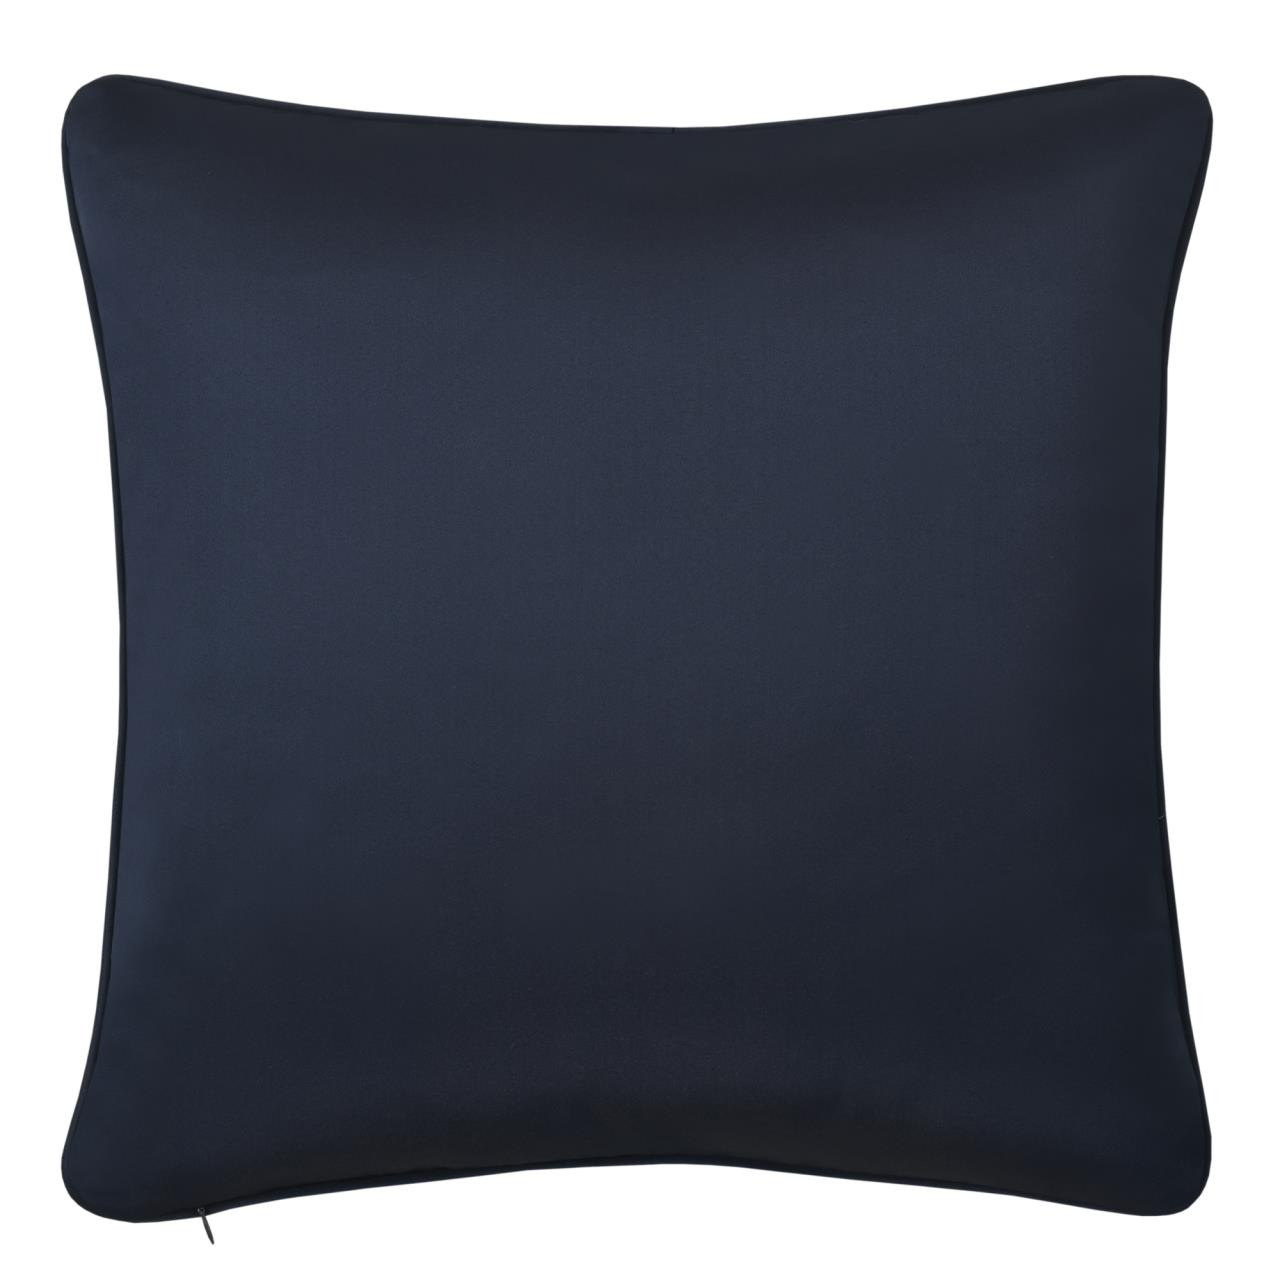 J. by J. Queen New York Mikayla Square Throw Pillow - Blue - 18 in